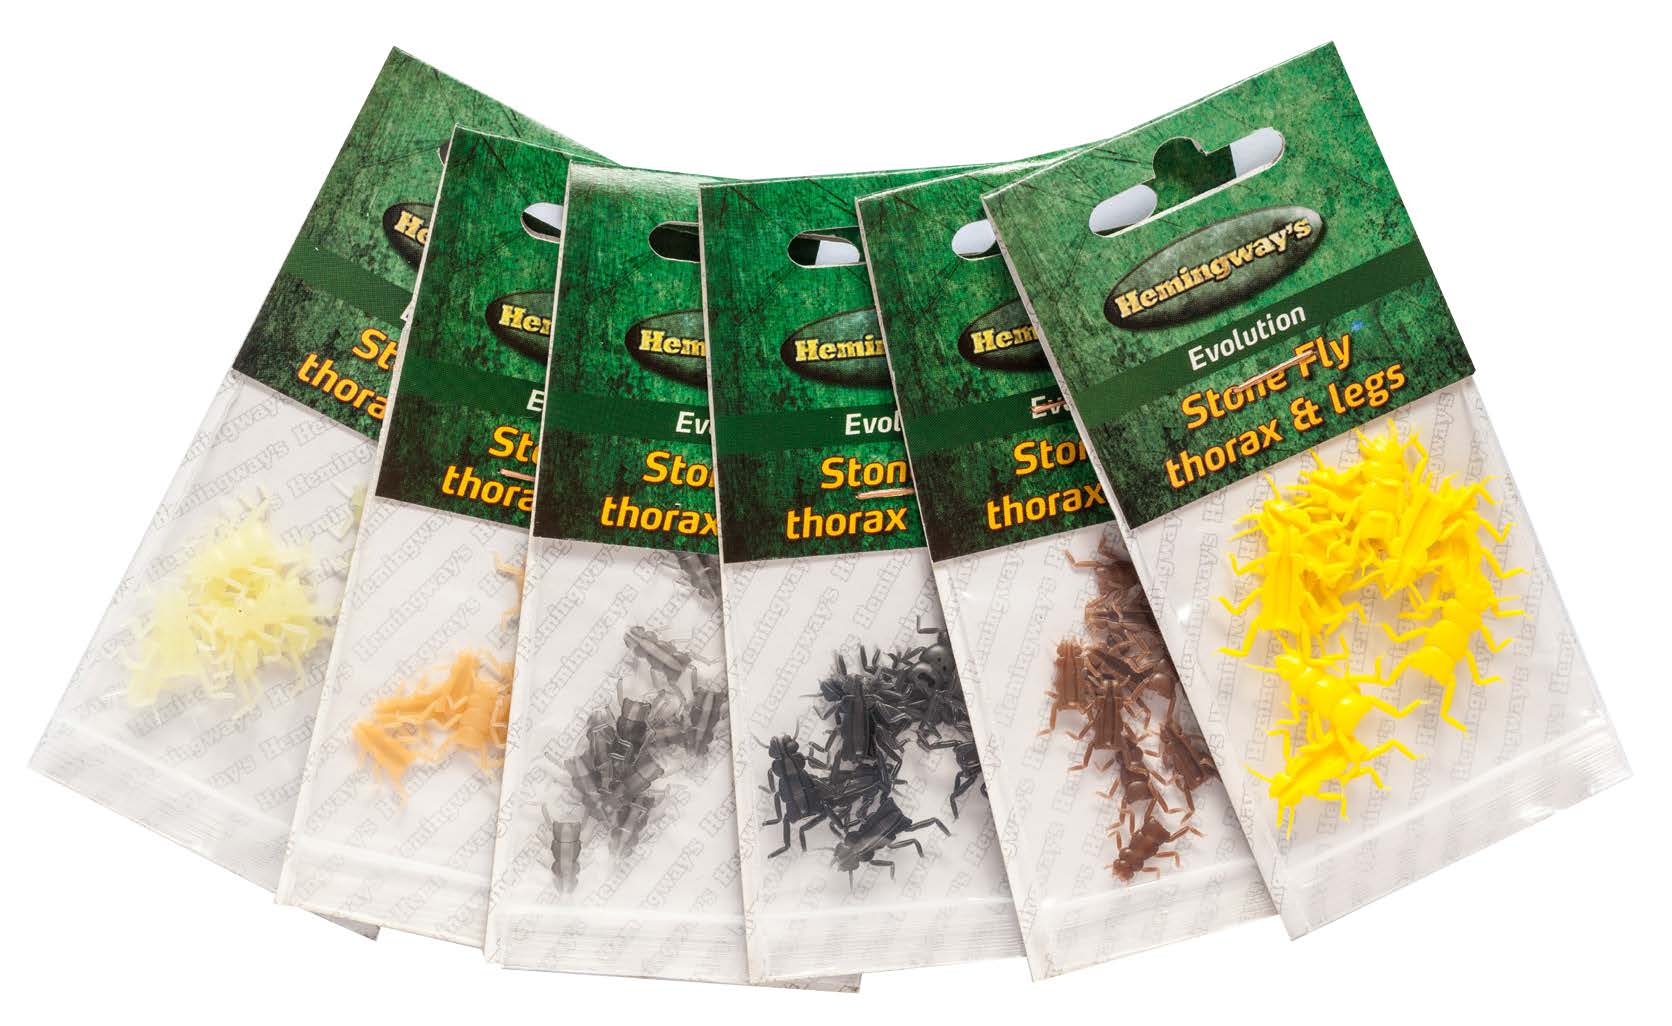 Hemingway's Evolution Stone Fly Thorax & Legs Small Golden Yellow Fly Tying Materials